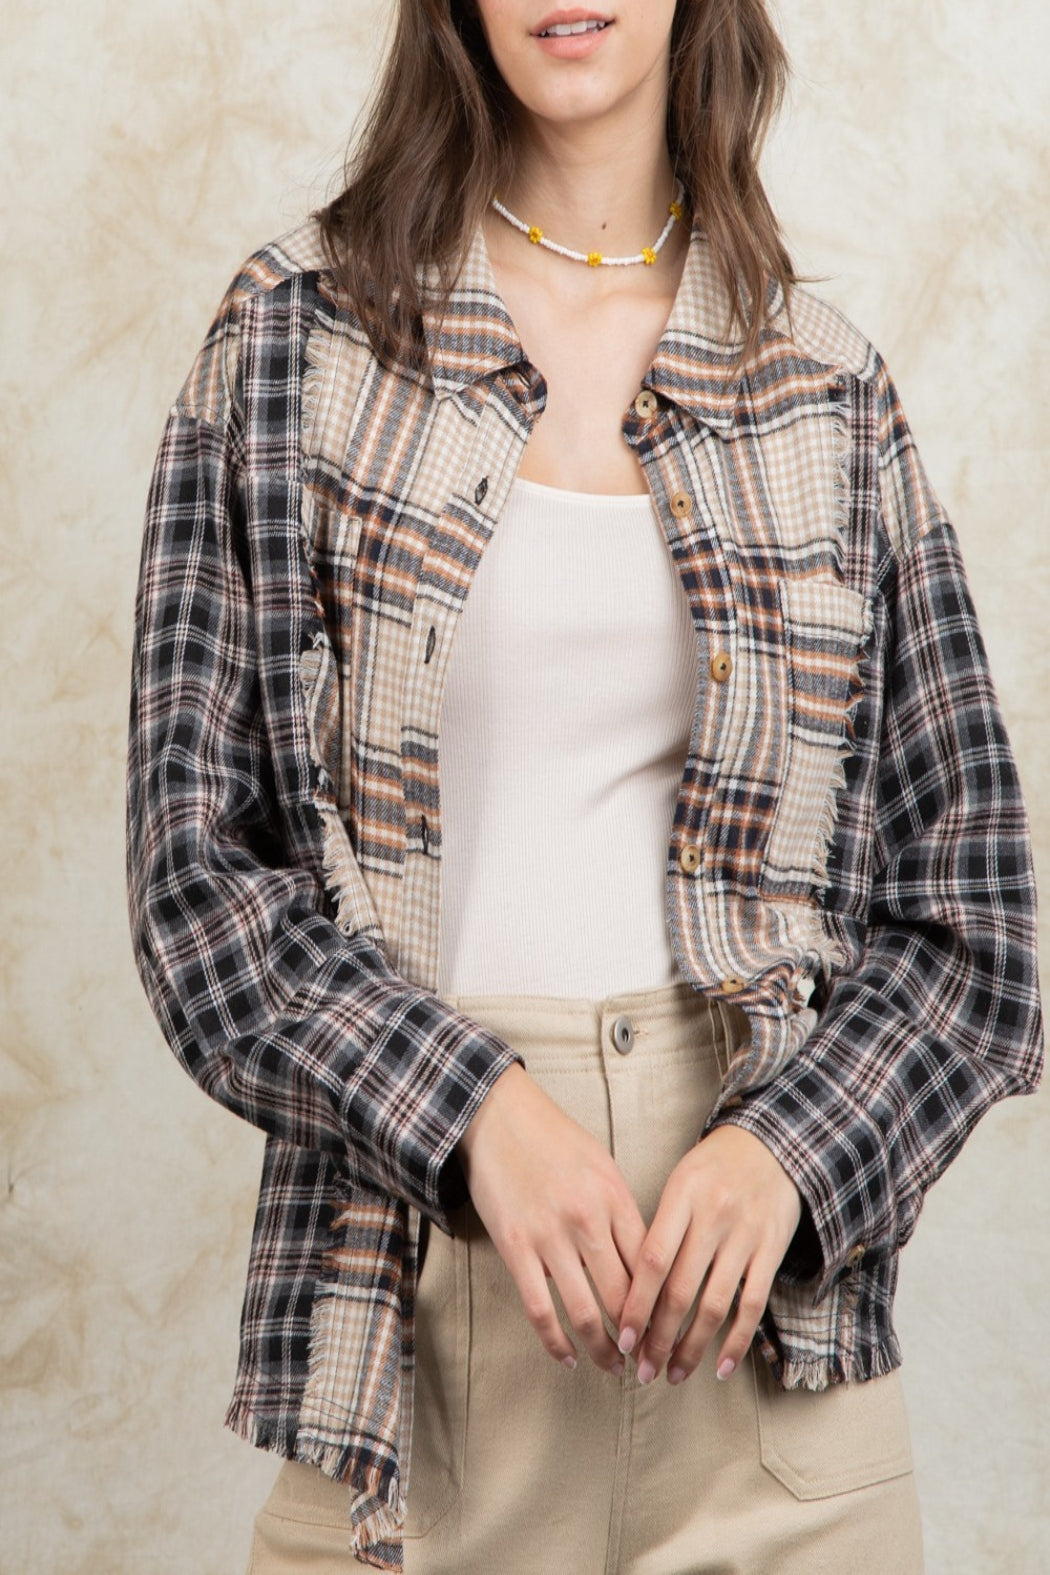 Warming Flame Contrast Plaid Button Down Top